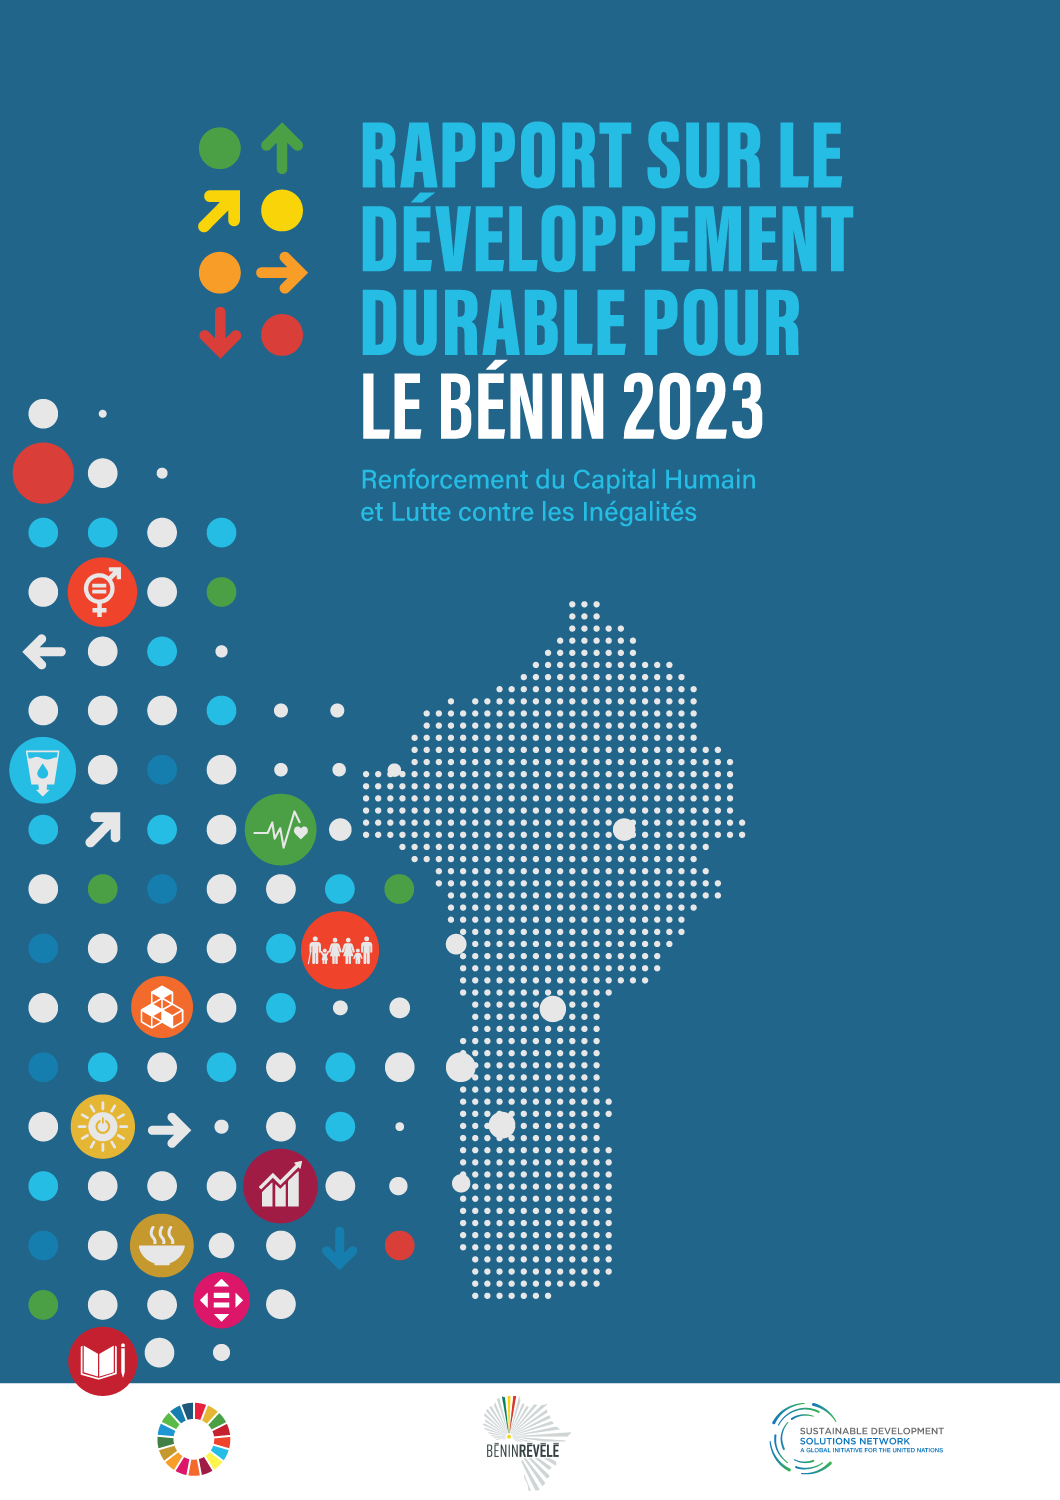 Sustainable Development Report for Small Island Developing States 2023